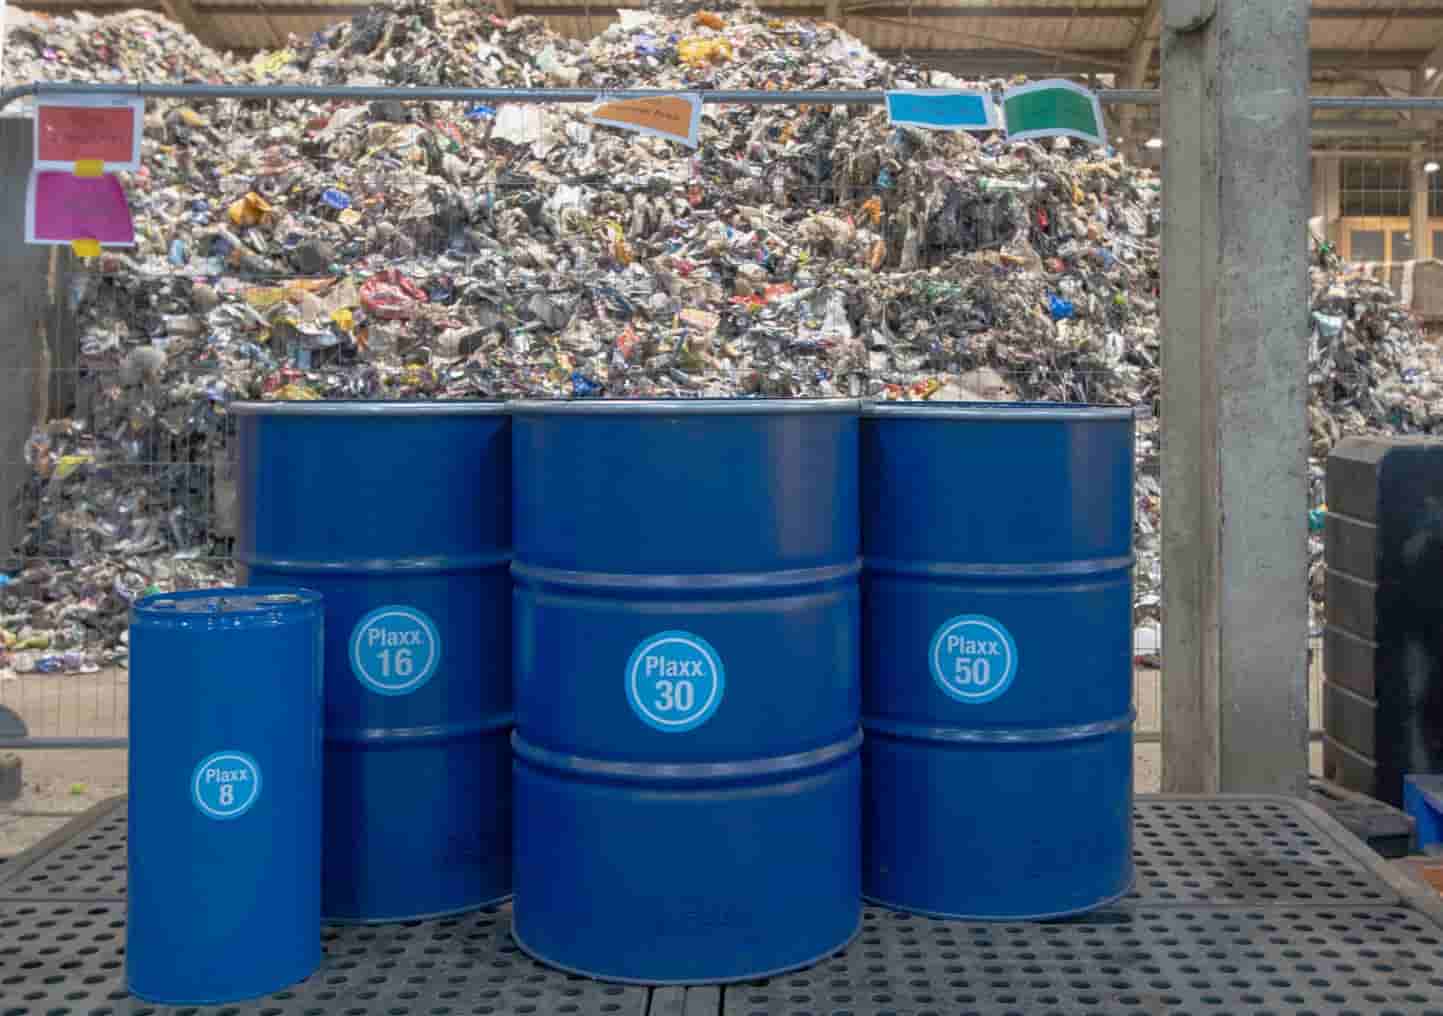 PS Recycling Companies